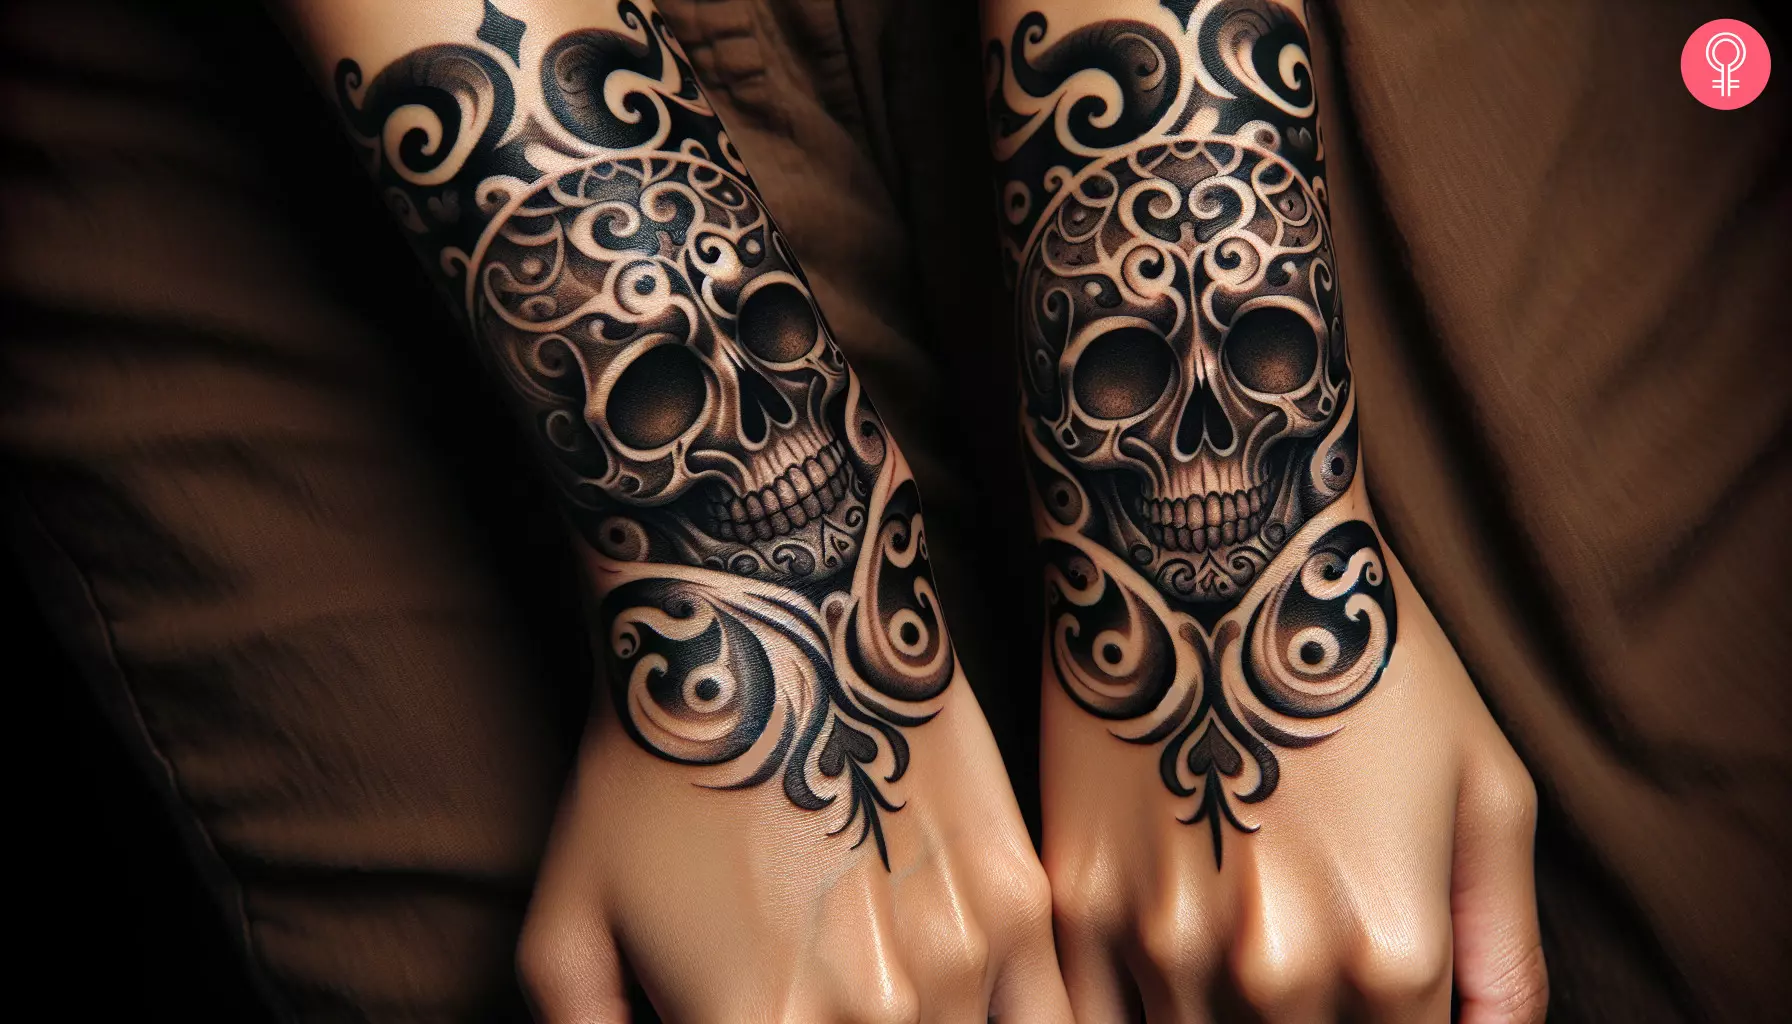 Matching skull tattoos on the hands